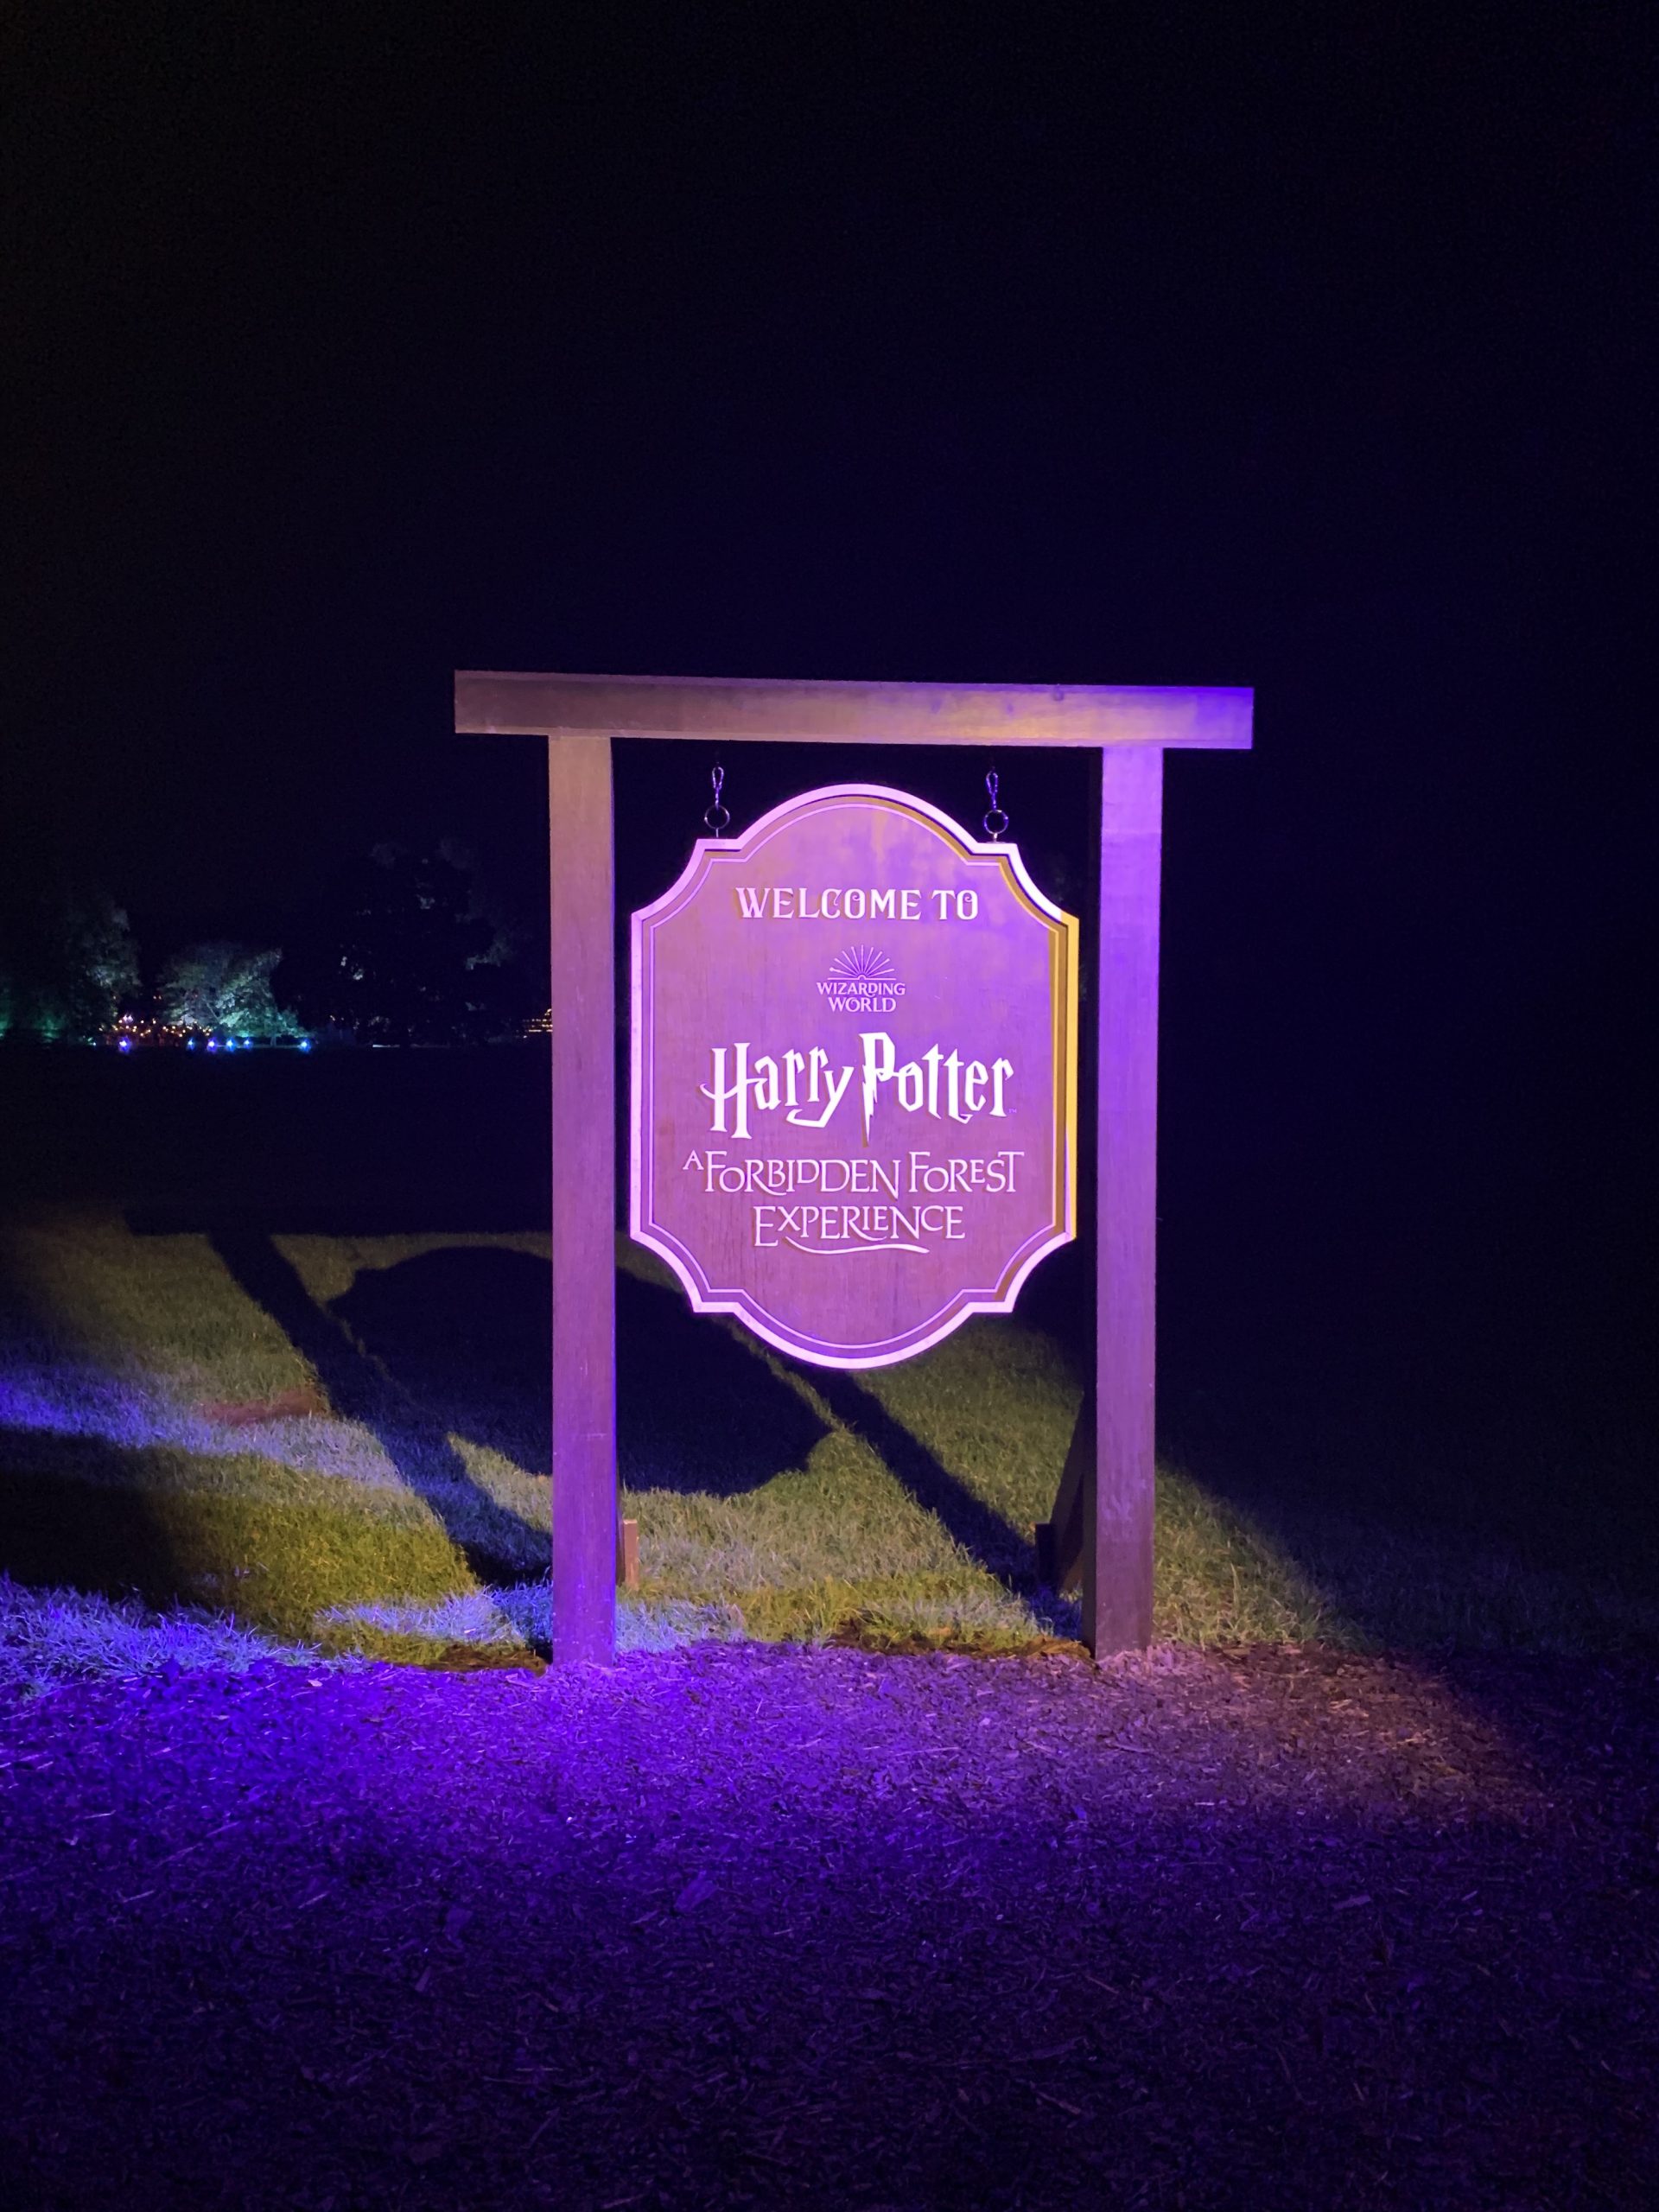 The Harry Potter Forbidden Forest experience